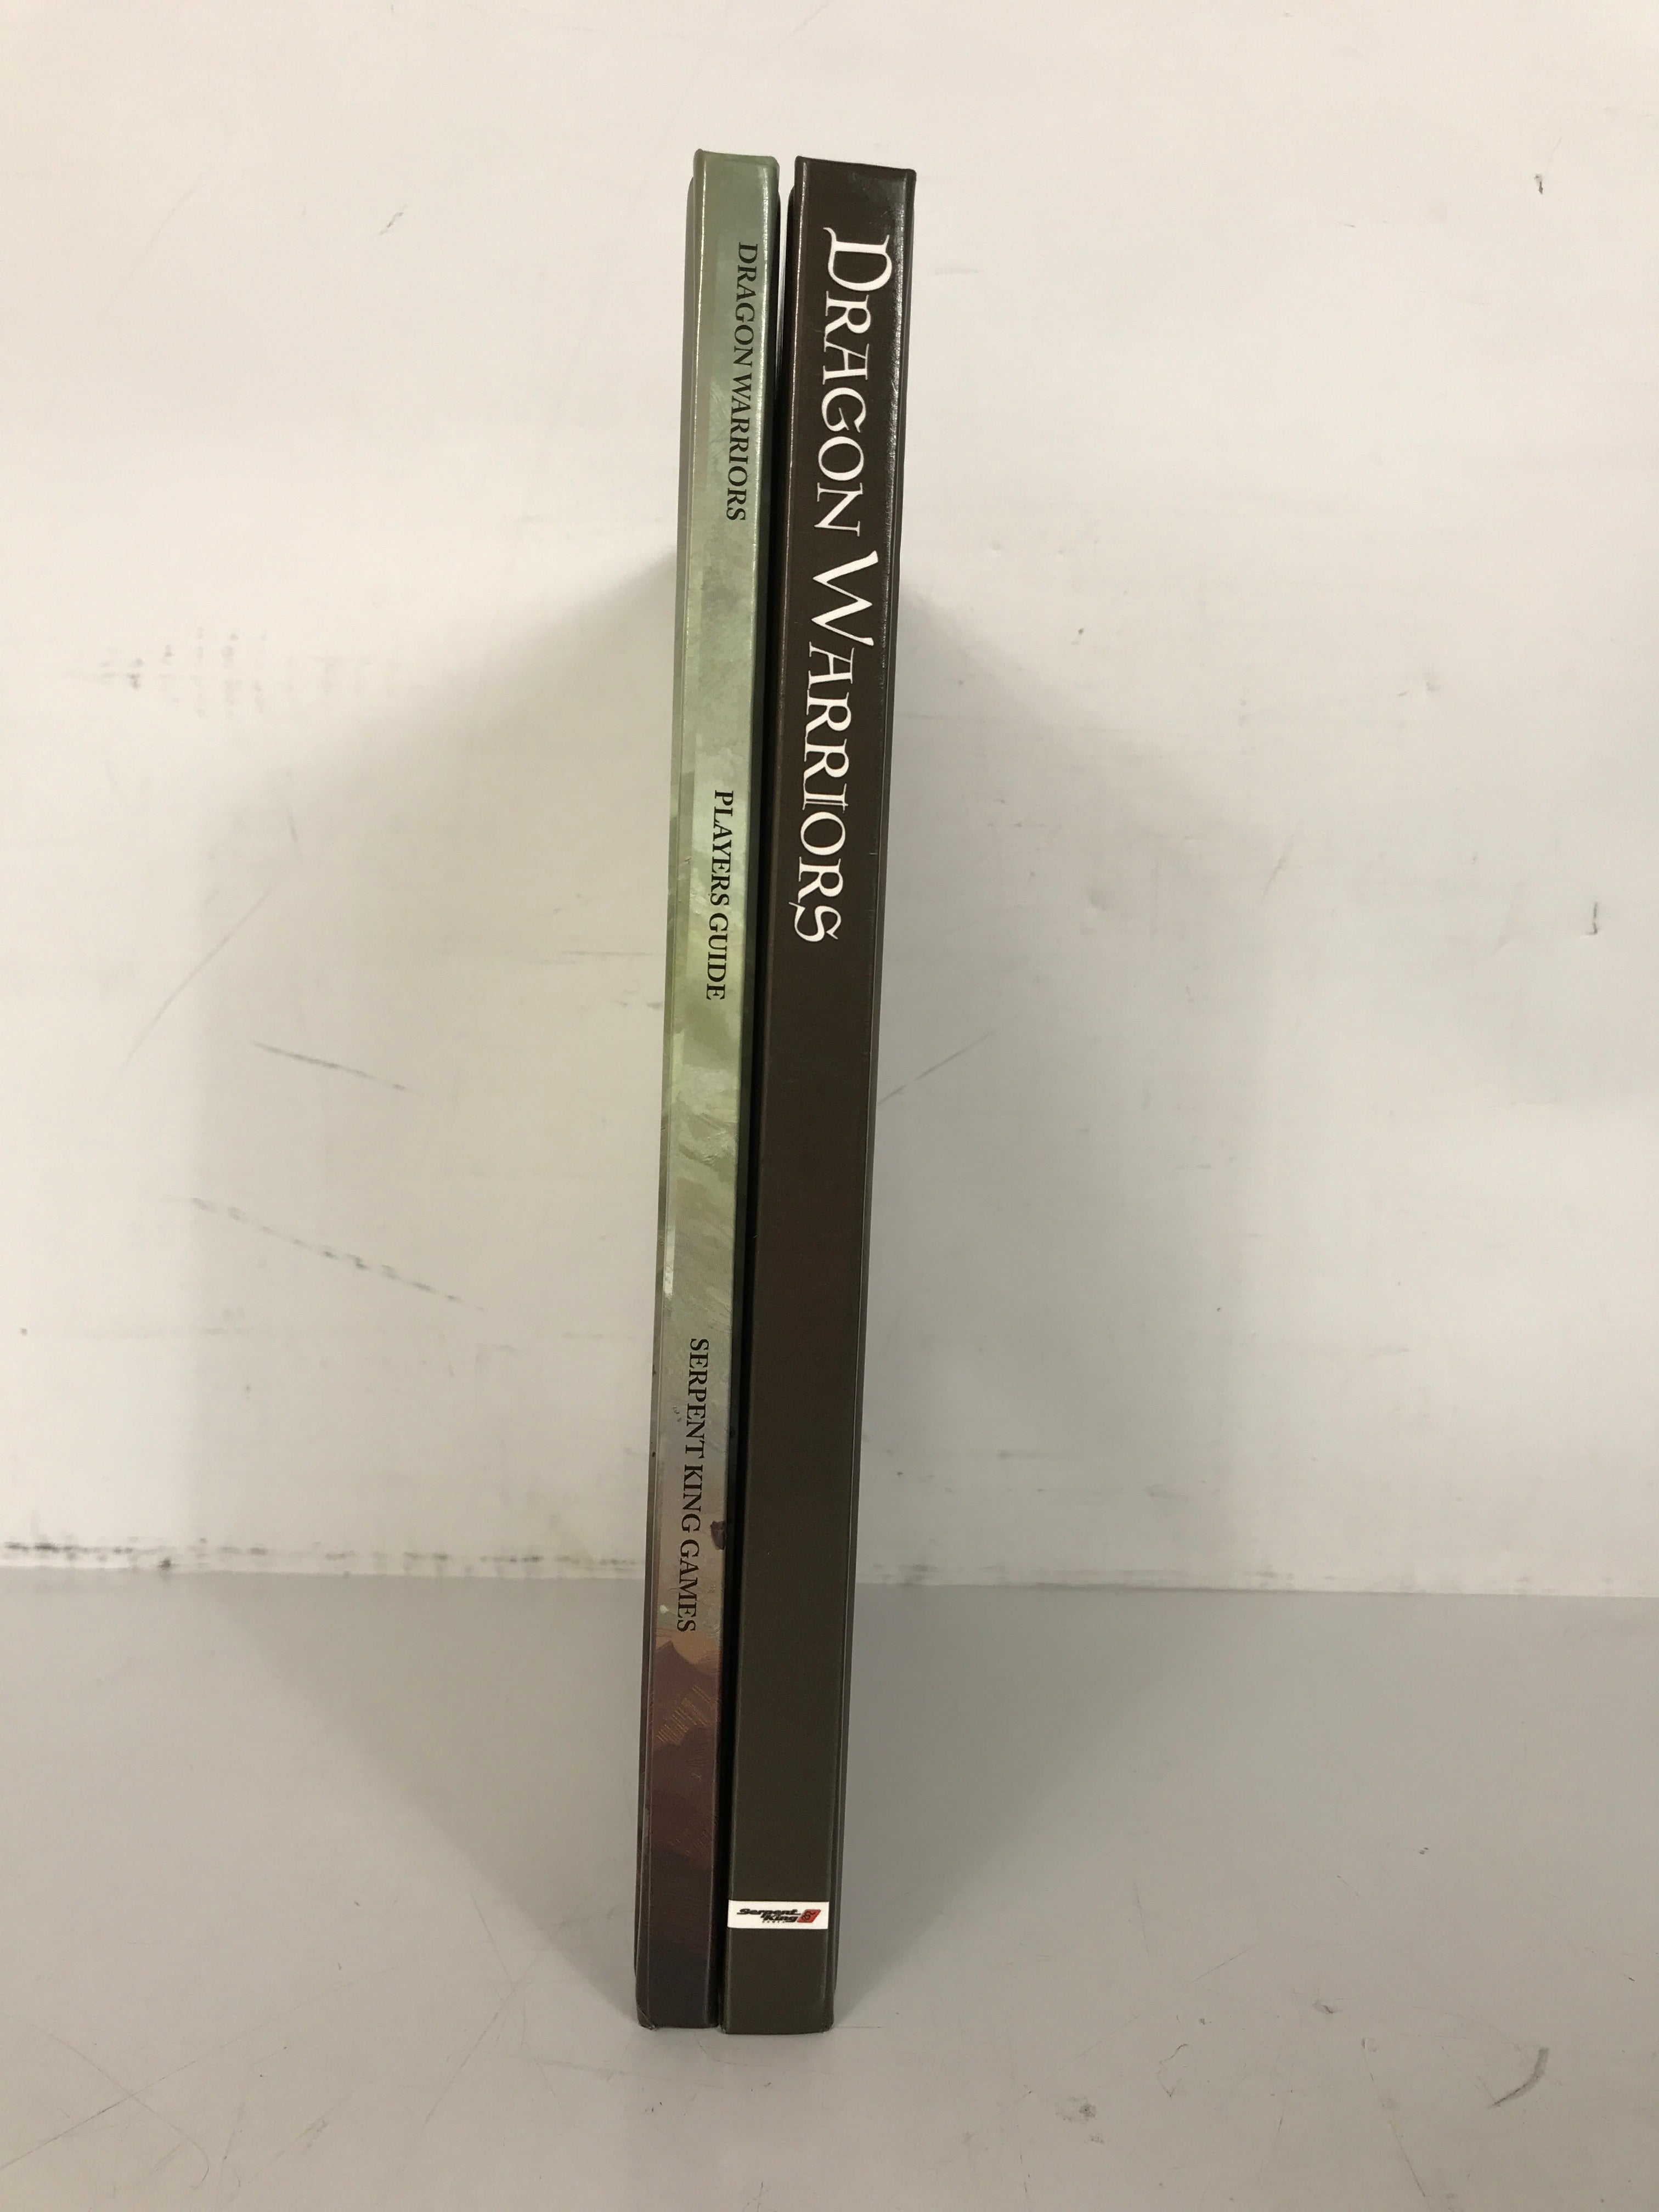 Lot of 2 Dragon Warriors Books: Rulebook and Players Guide 2011-2015 HC